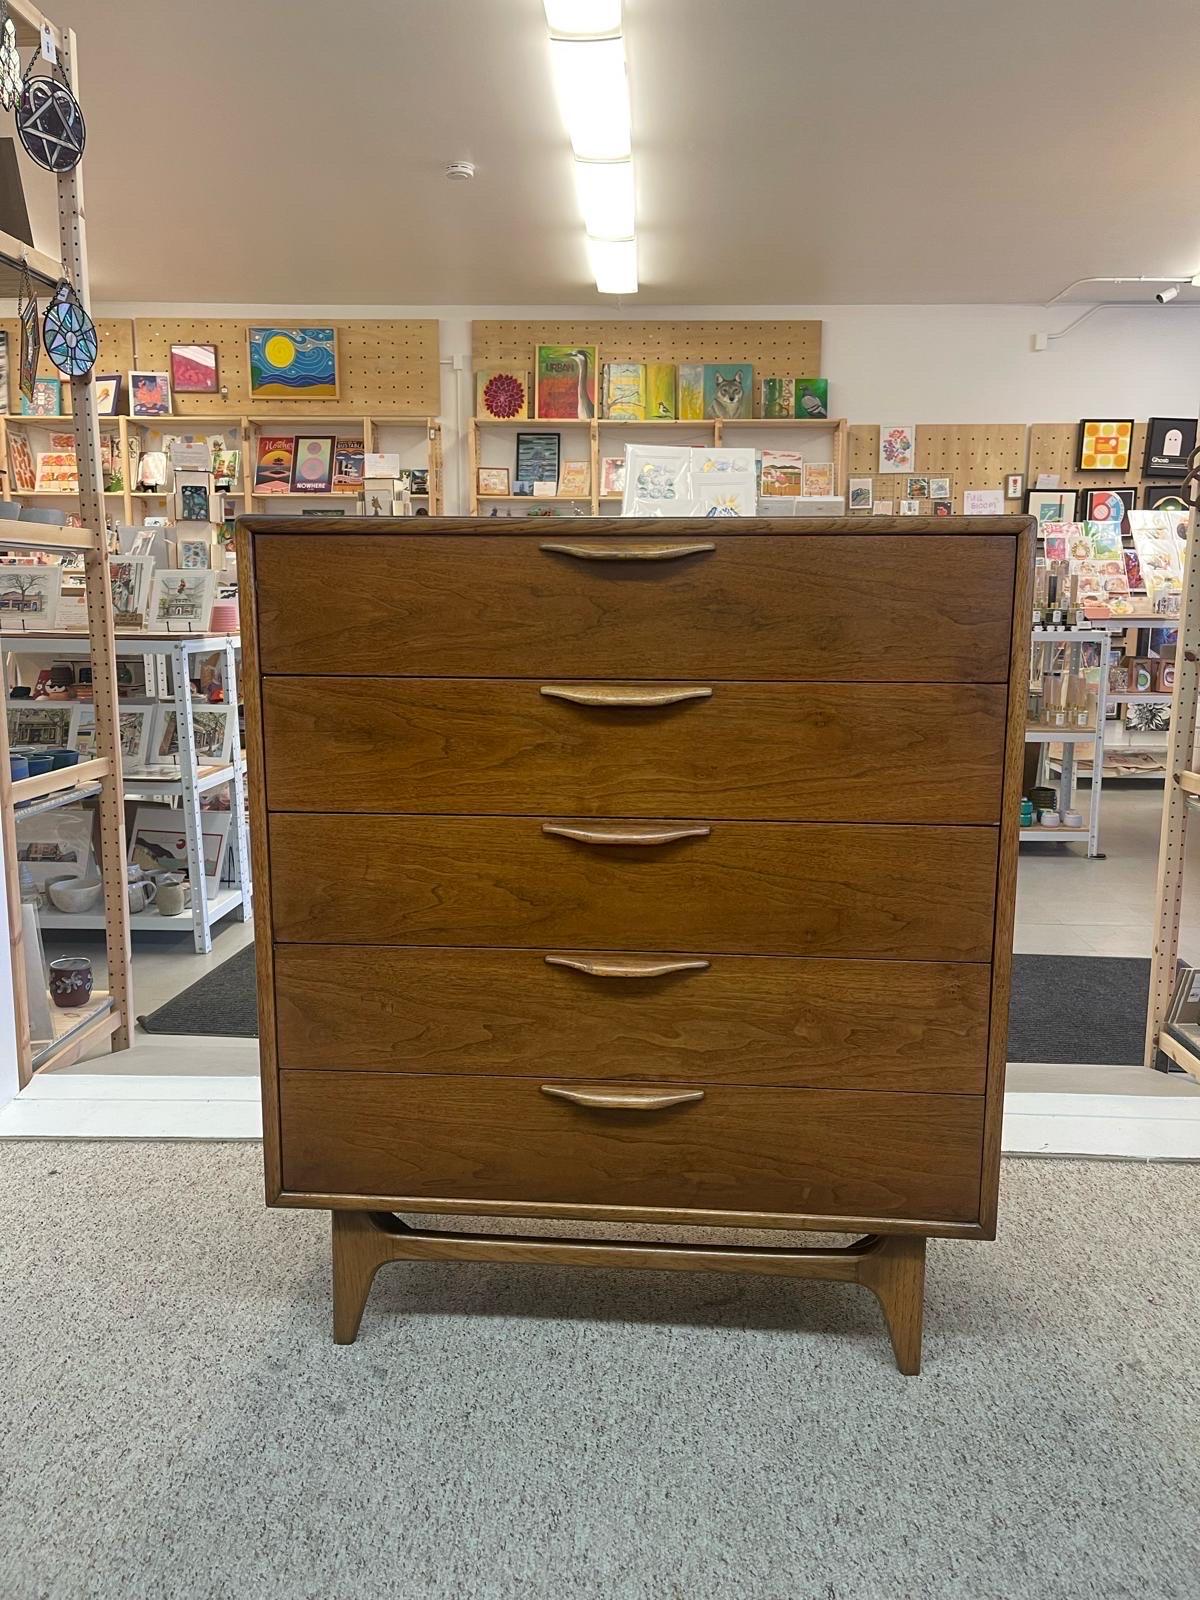 This dresser features five dovetailed drawers with sculpted wood handles. Circa 1960’s / 1970’s. Tapered Legs, Classic lane design. Vintage Condition Consistent with Age as Pictured. 

Dimensions. 36 W ; 19 D ; 42 1/4 H